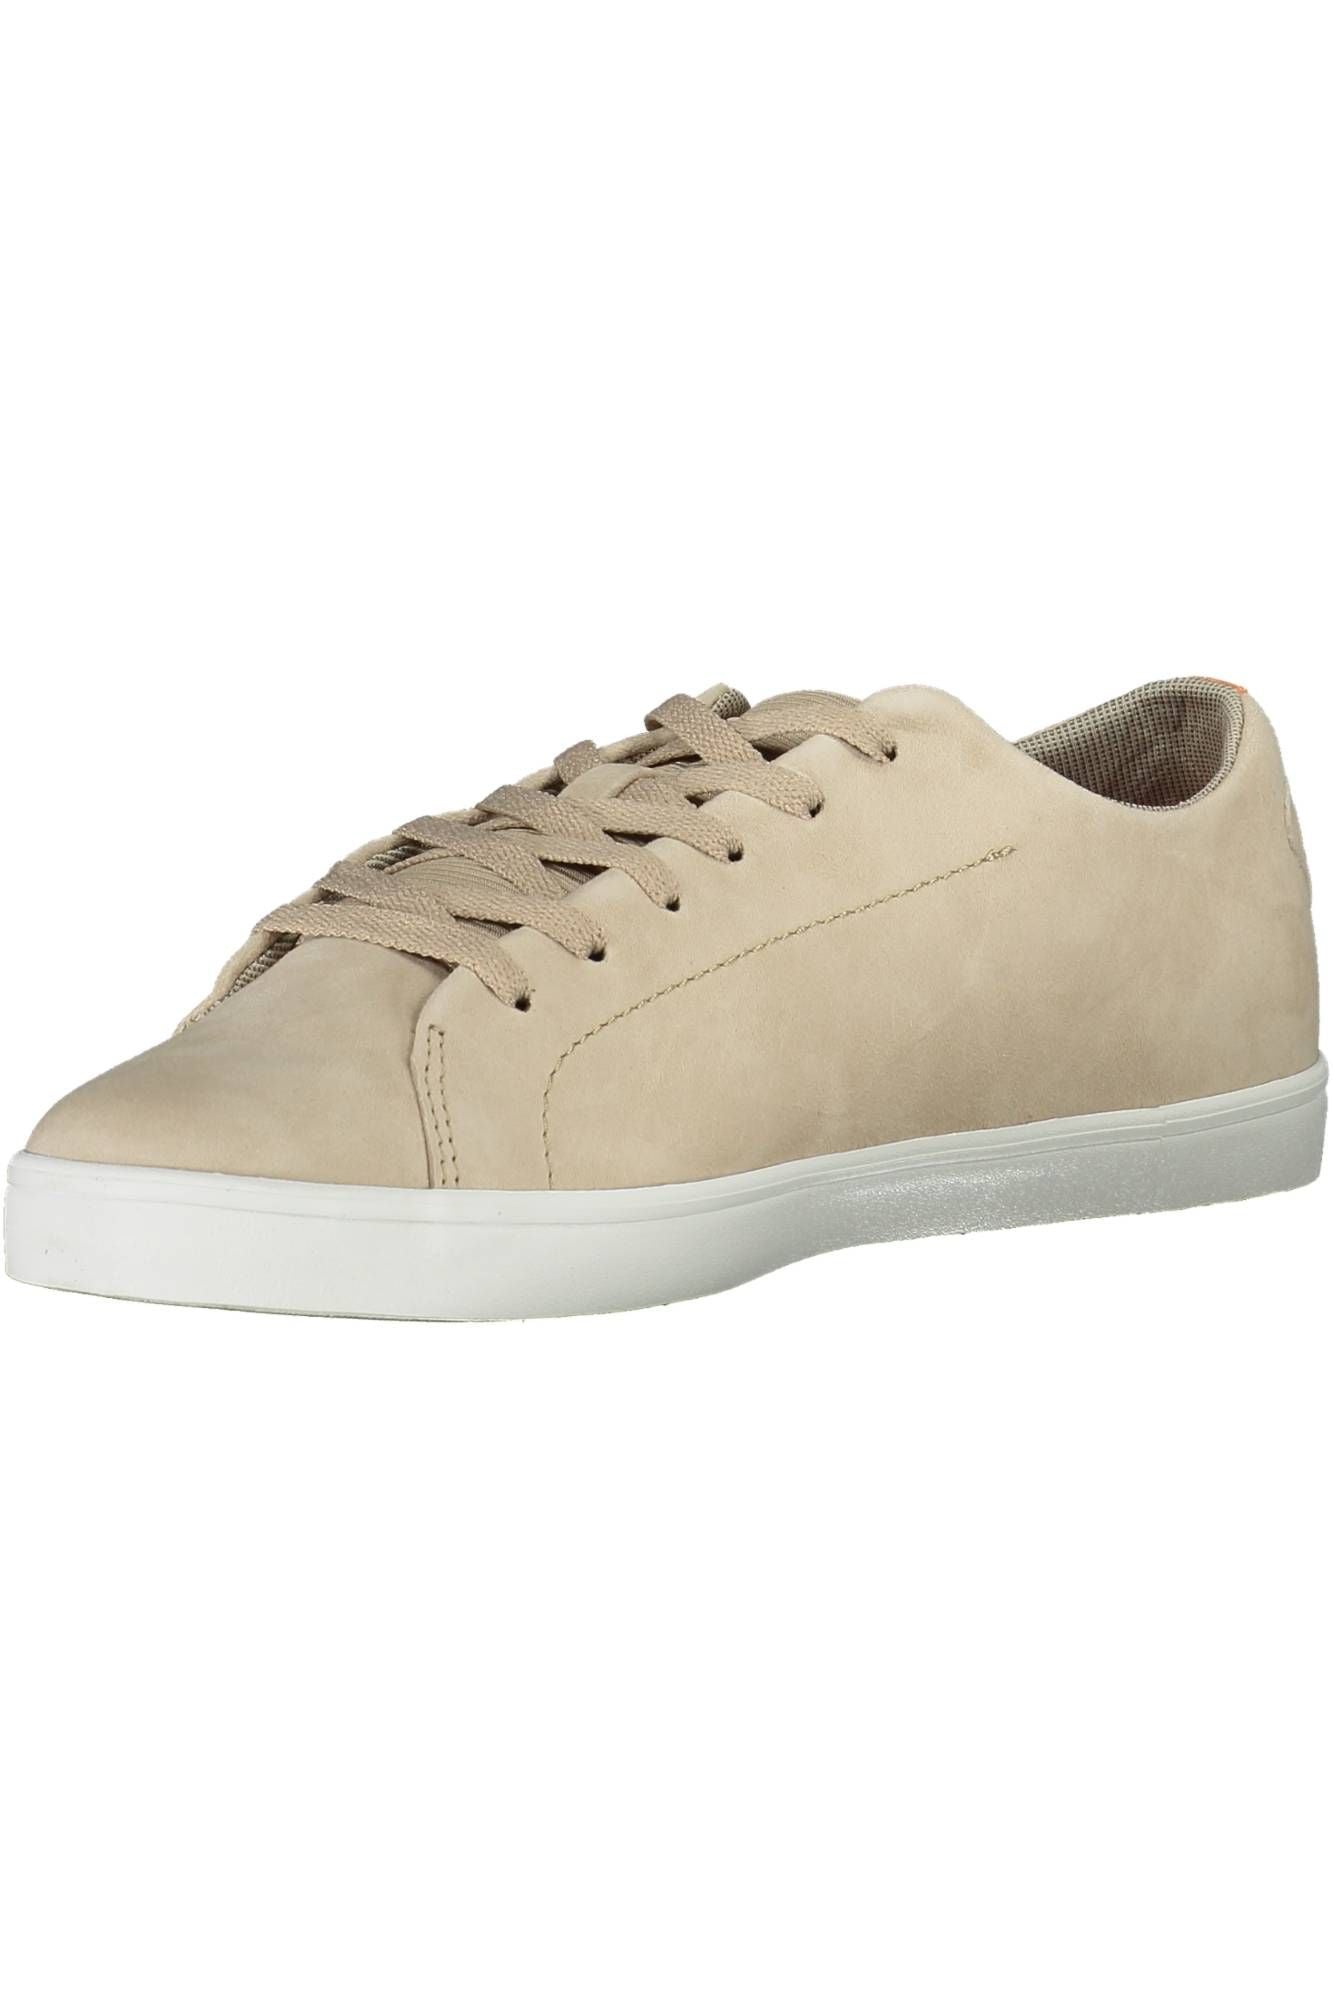 Chic Beige Leather Sneakers with Contrasting Sole